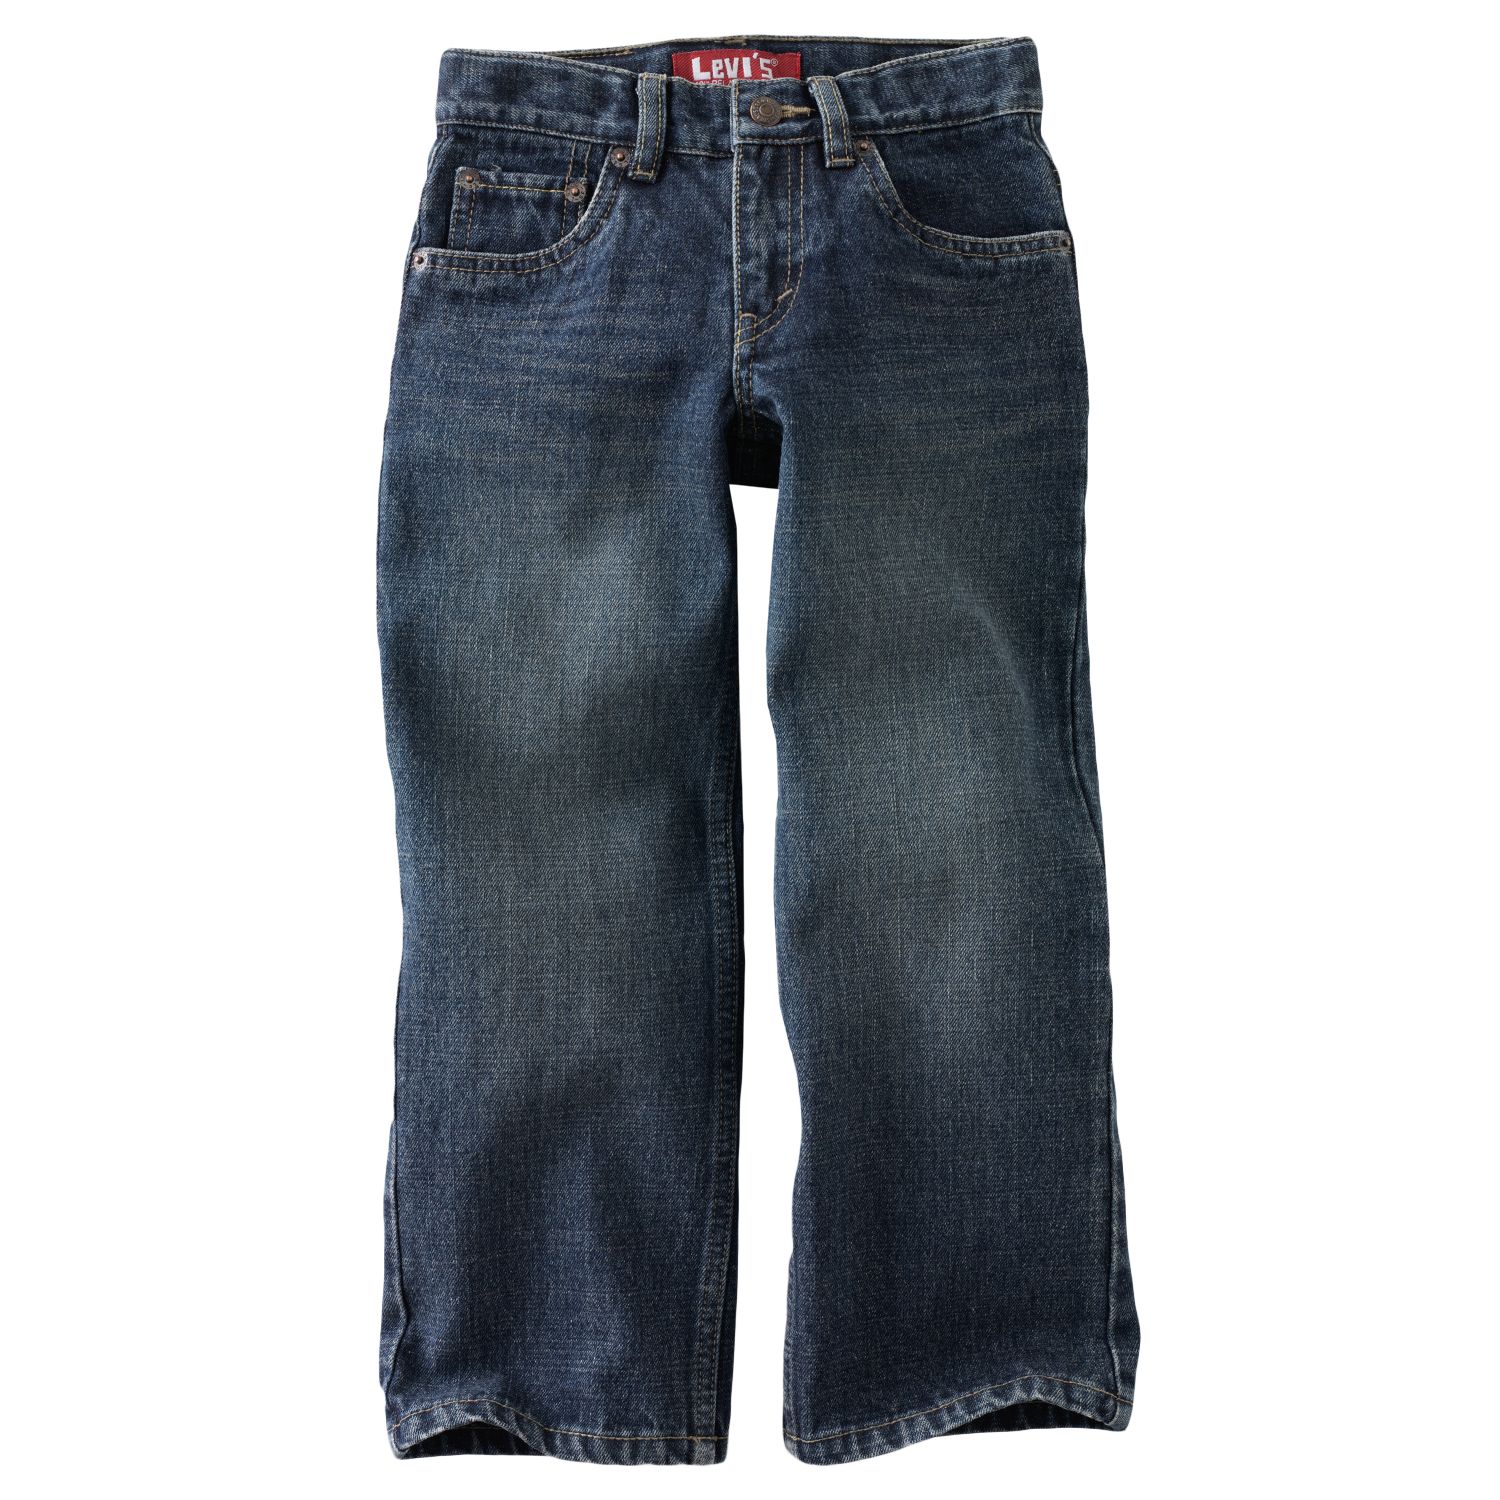 Levi's 549 Relaxed Fit Jeans - Boys 4-7x